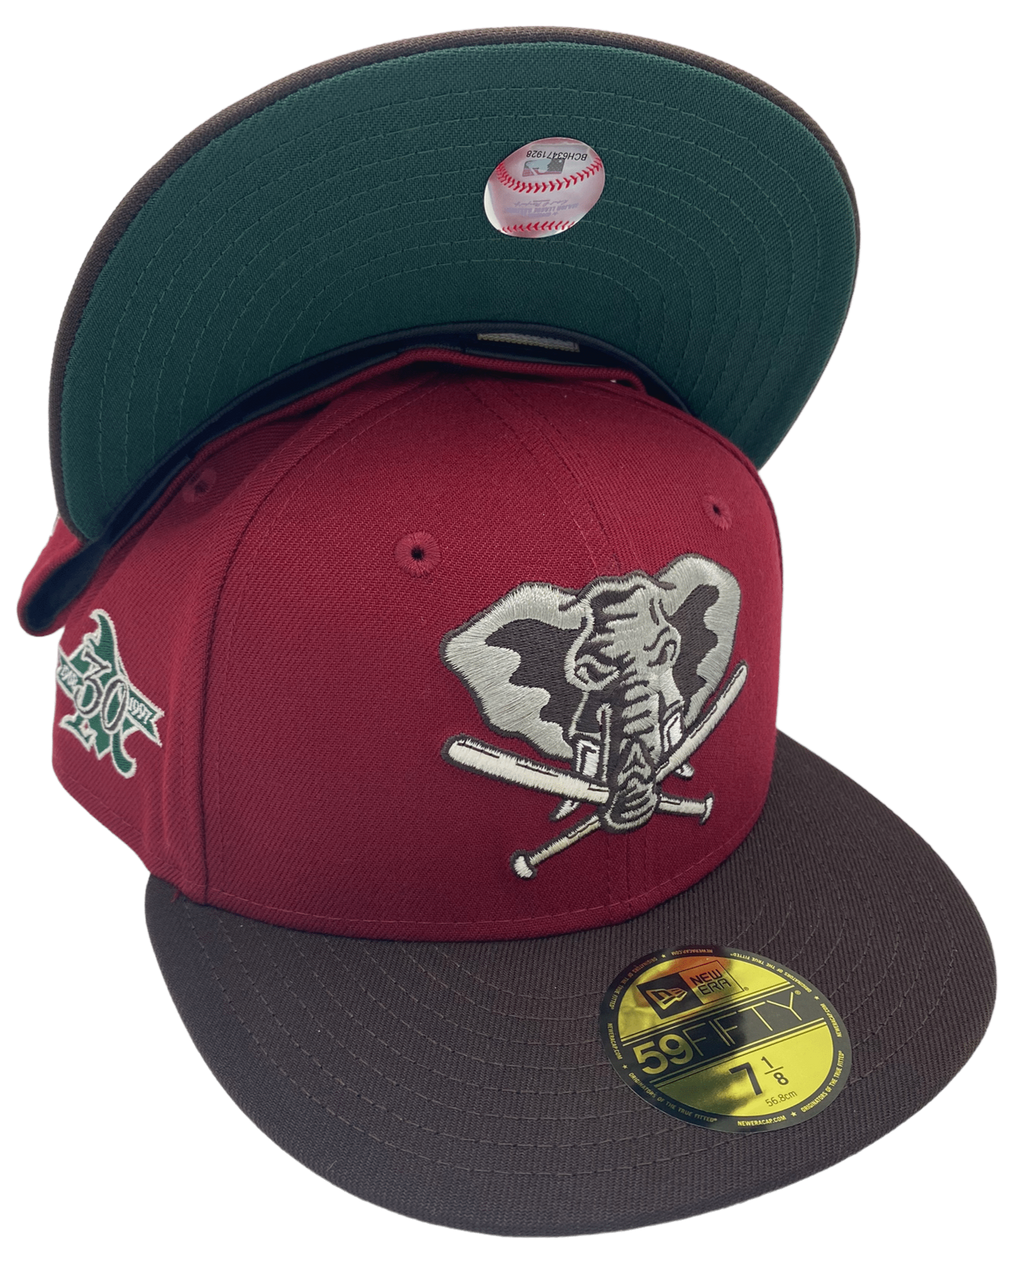 Oakland Athletics Elephant Patch New Era 59FIFTY Fitted Hat (Navy Black Gray Under BRIM) 7 3/4